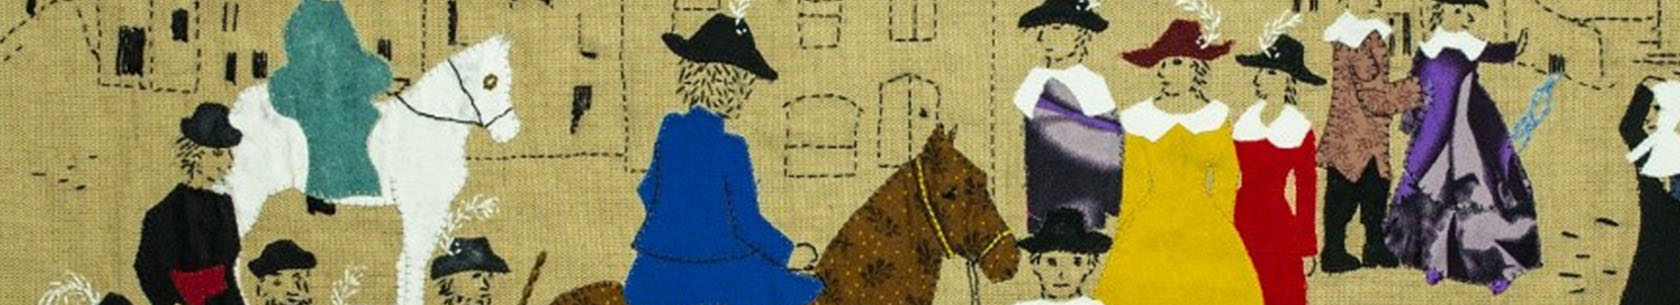 Axbridge Pageant Tapestry Detail